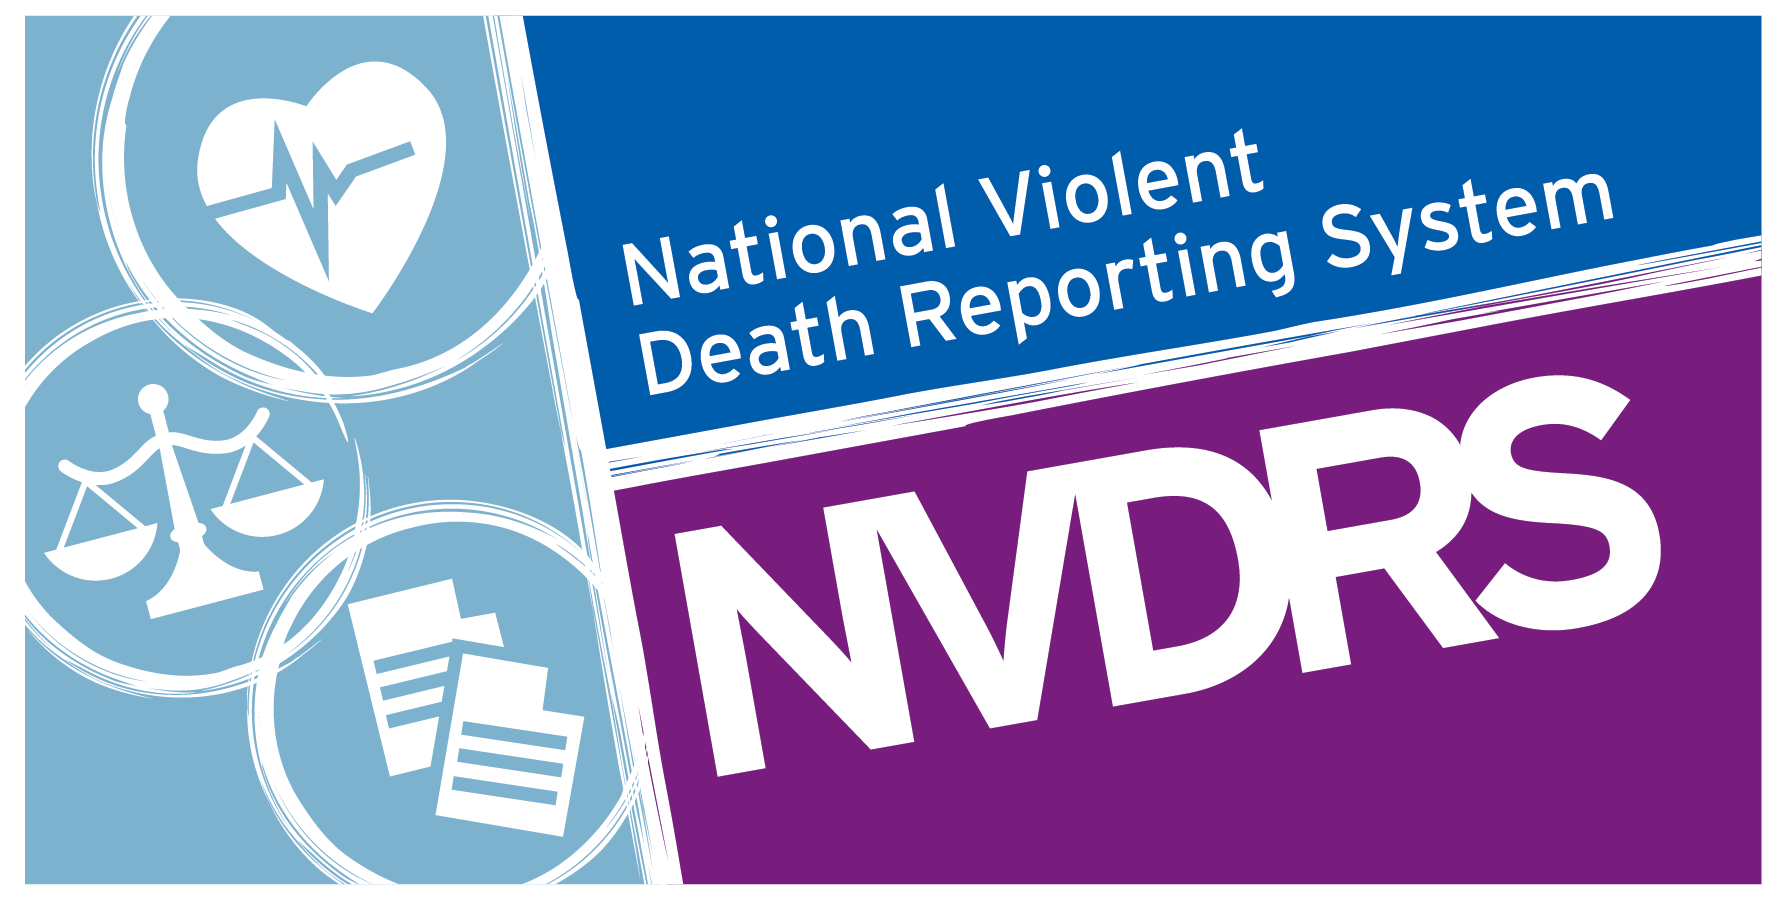 NVDRS: National Violent Death Reporting System